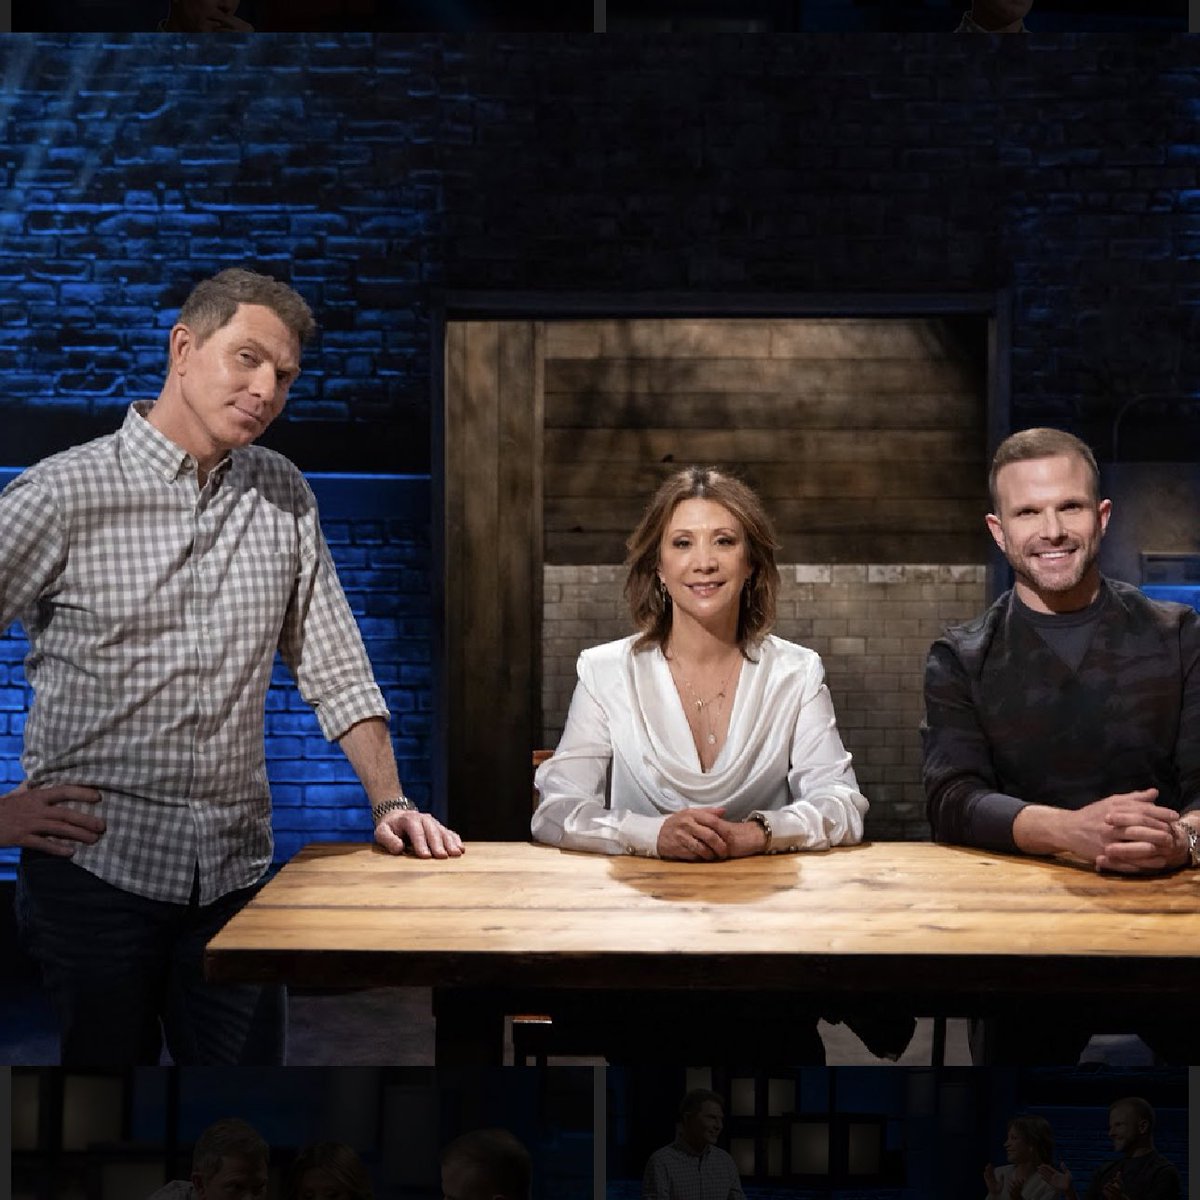 TONIGHT’s new #BeatBobbyFlay with Cheri Oteri & Zac Young begins at 9pm on @FoodNetwork !!